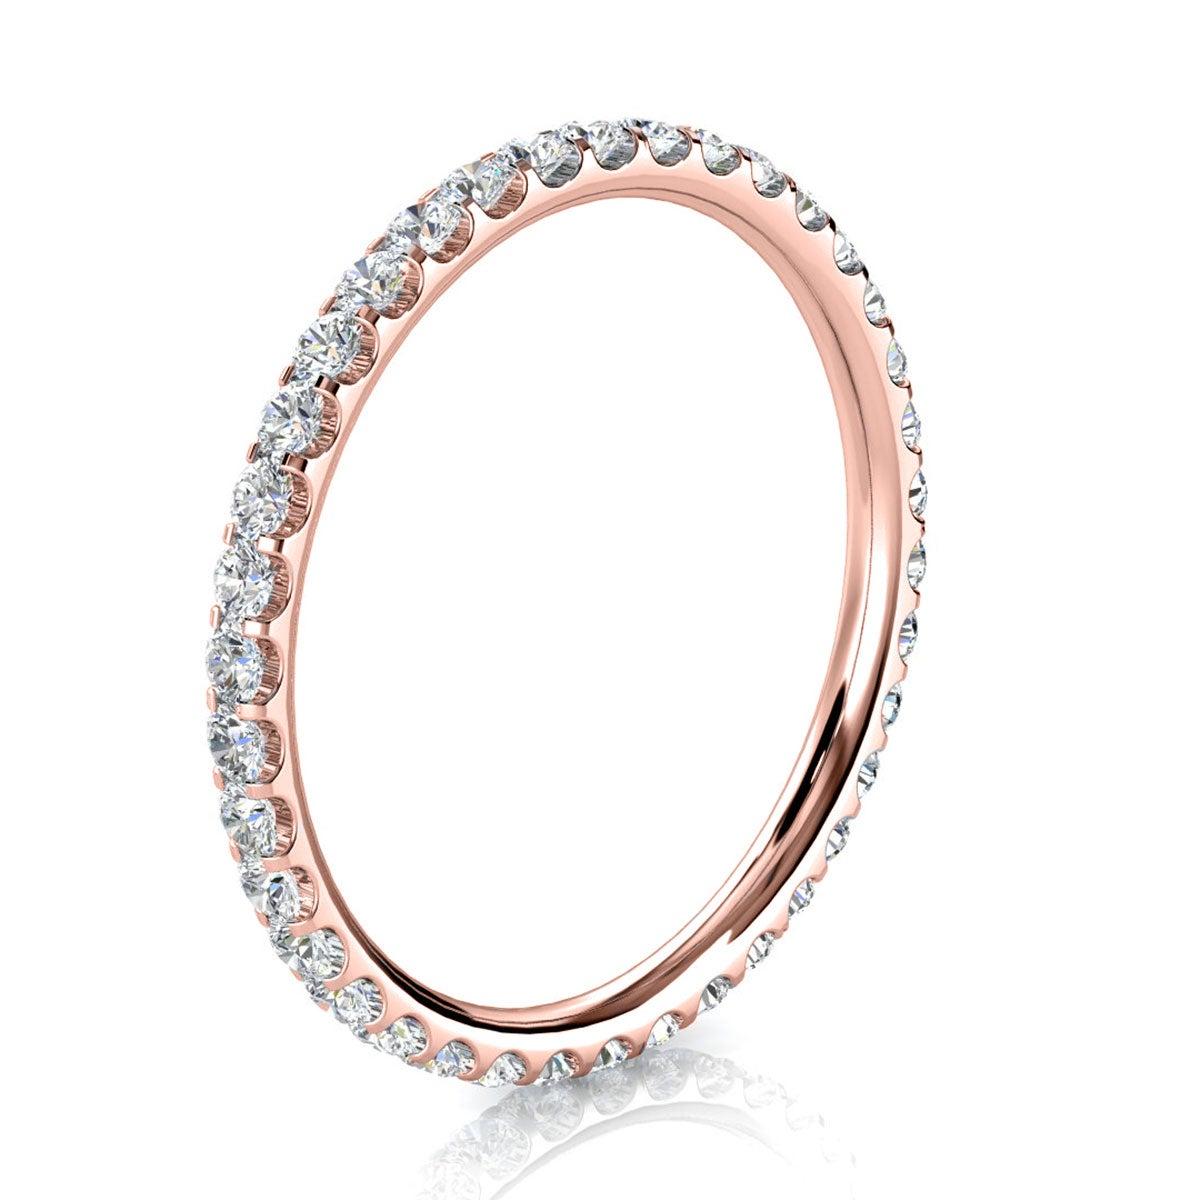 For Sale:  18K Rose Gold Viola Eternity Micro-Prong Diamond Ring '1/2 Ct. Tw' 2